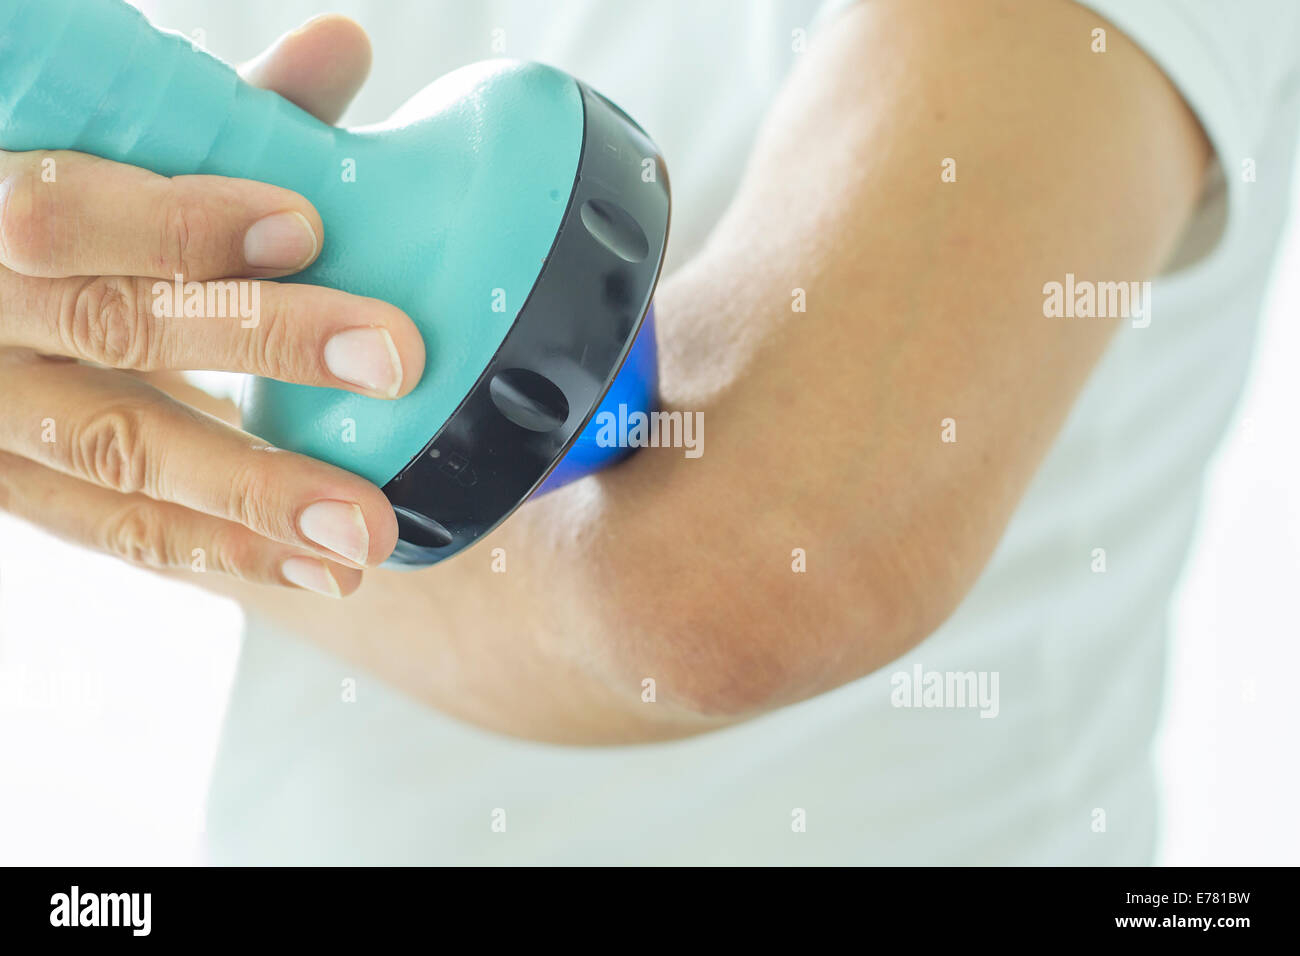 Shockwave therapy on the elbow Stock Photo